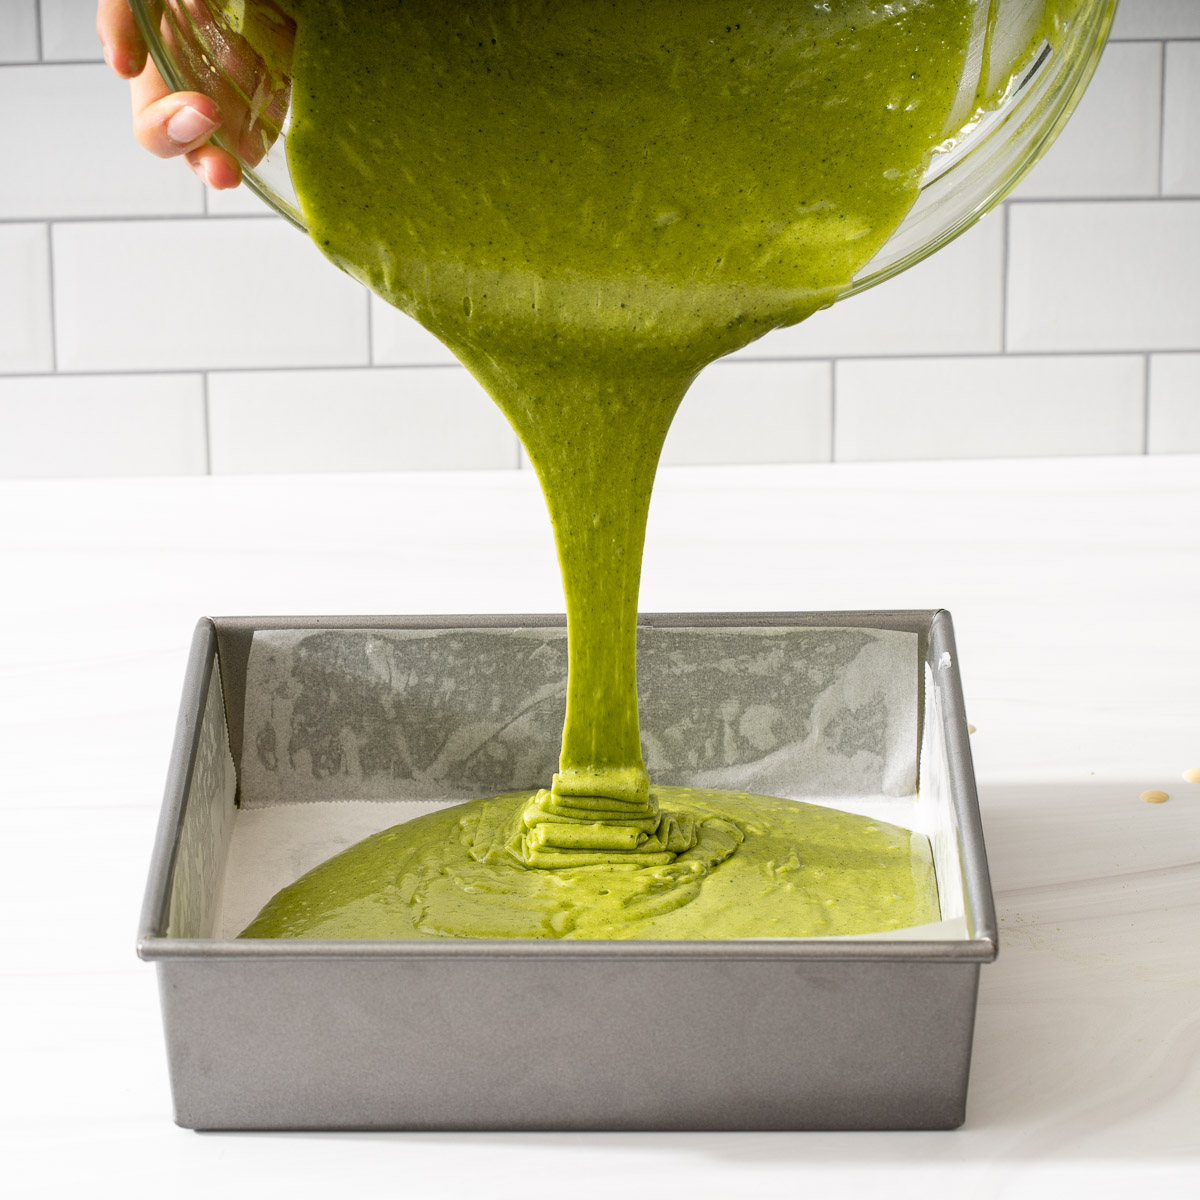 Pouring matcha brownie batter into a lined square baking pan.